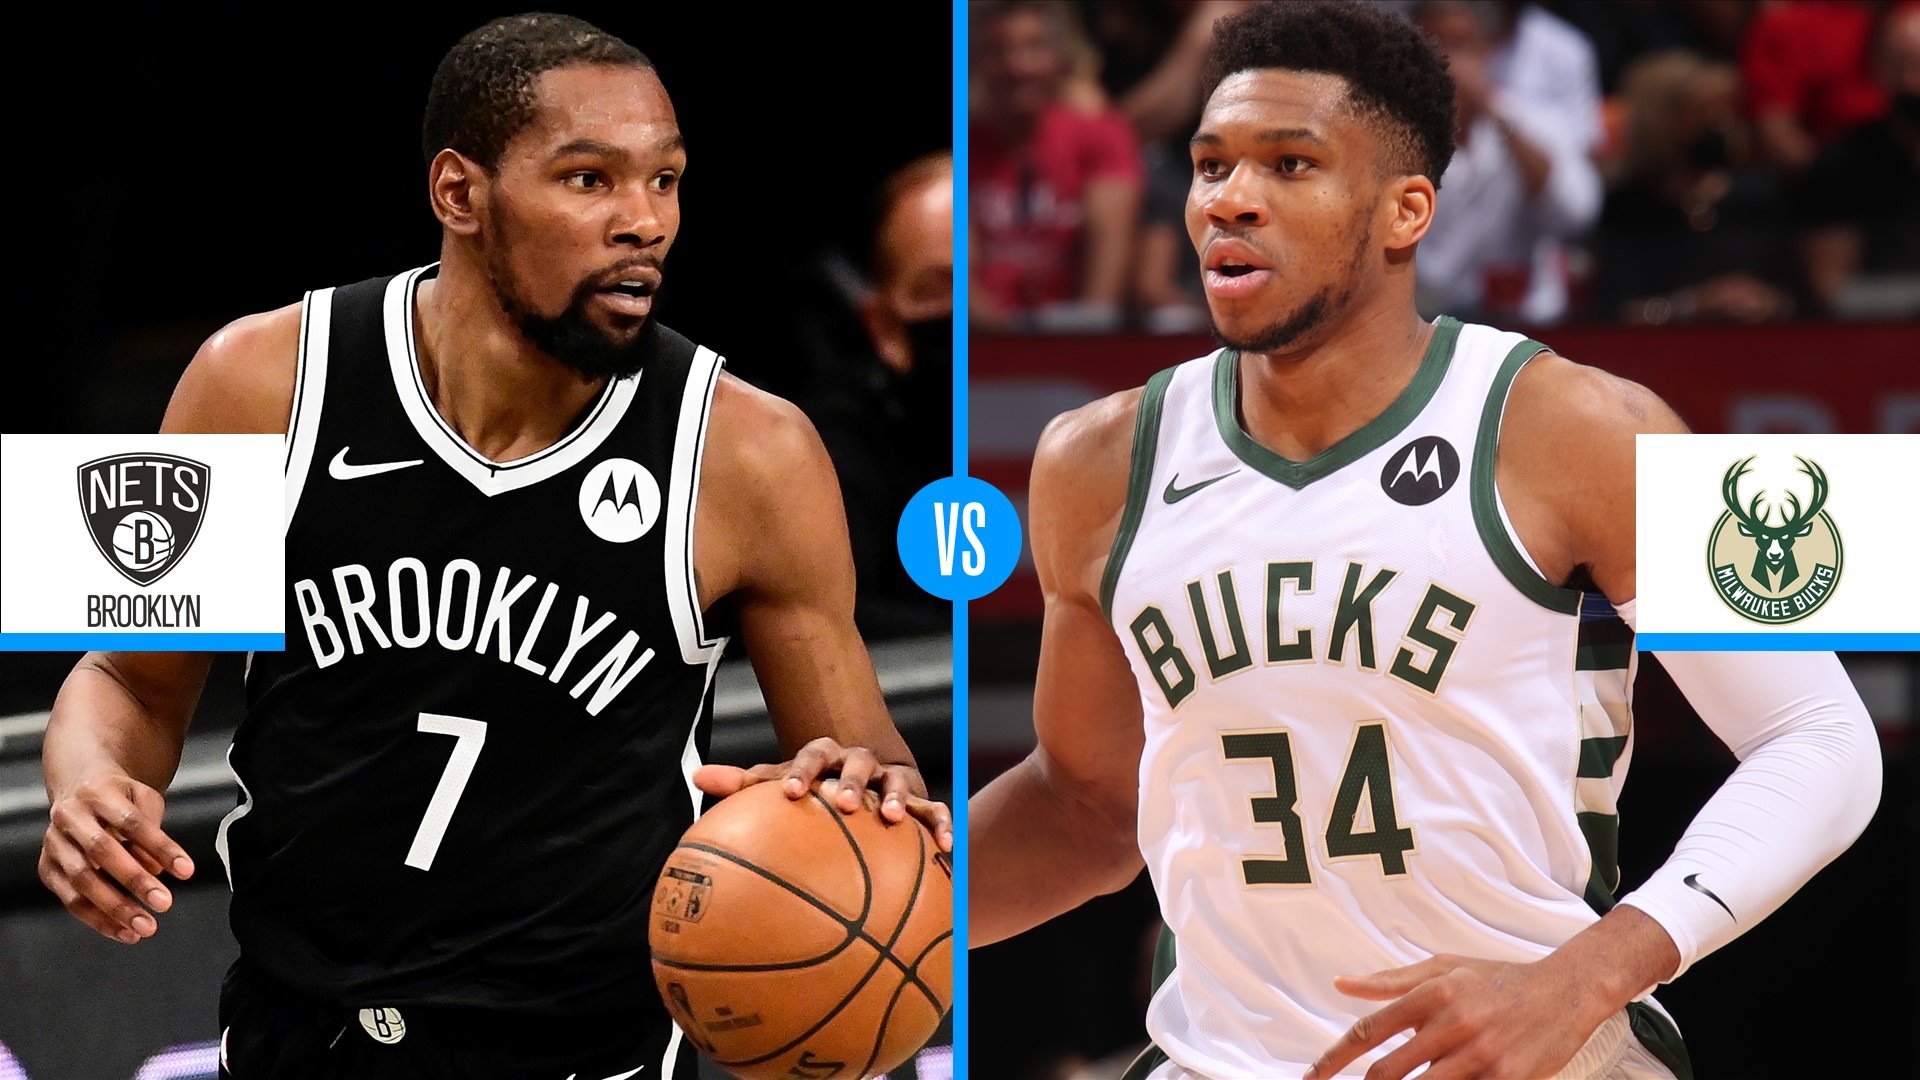 Nba Playoffs 2021 Brooklyn Nets Vs Milwaukee Bucks Series Preview Nba Com India The Official Site Of The Nba